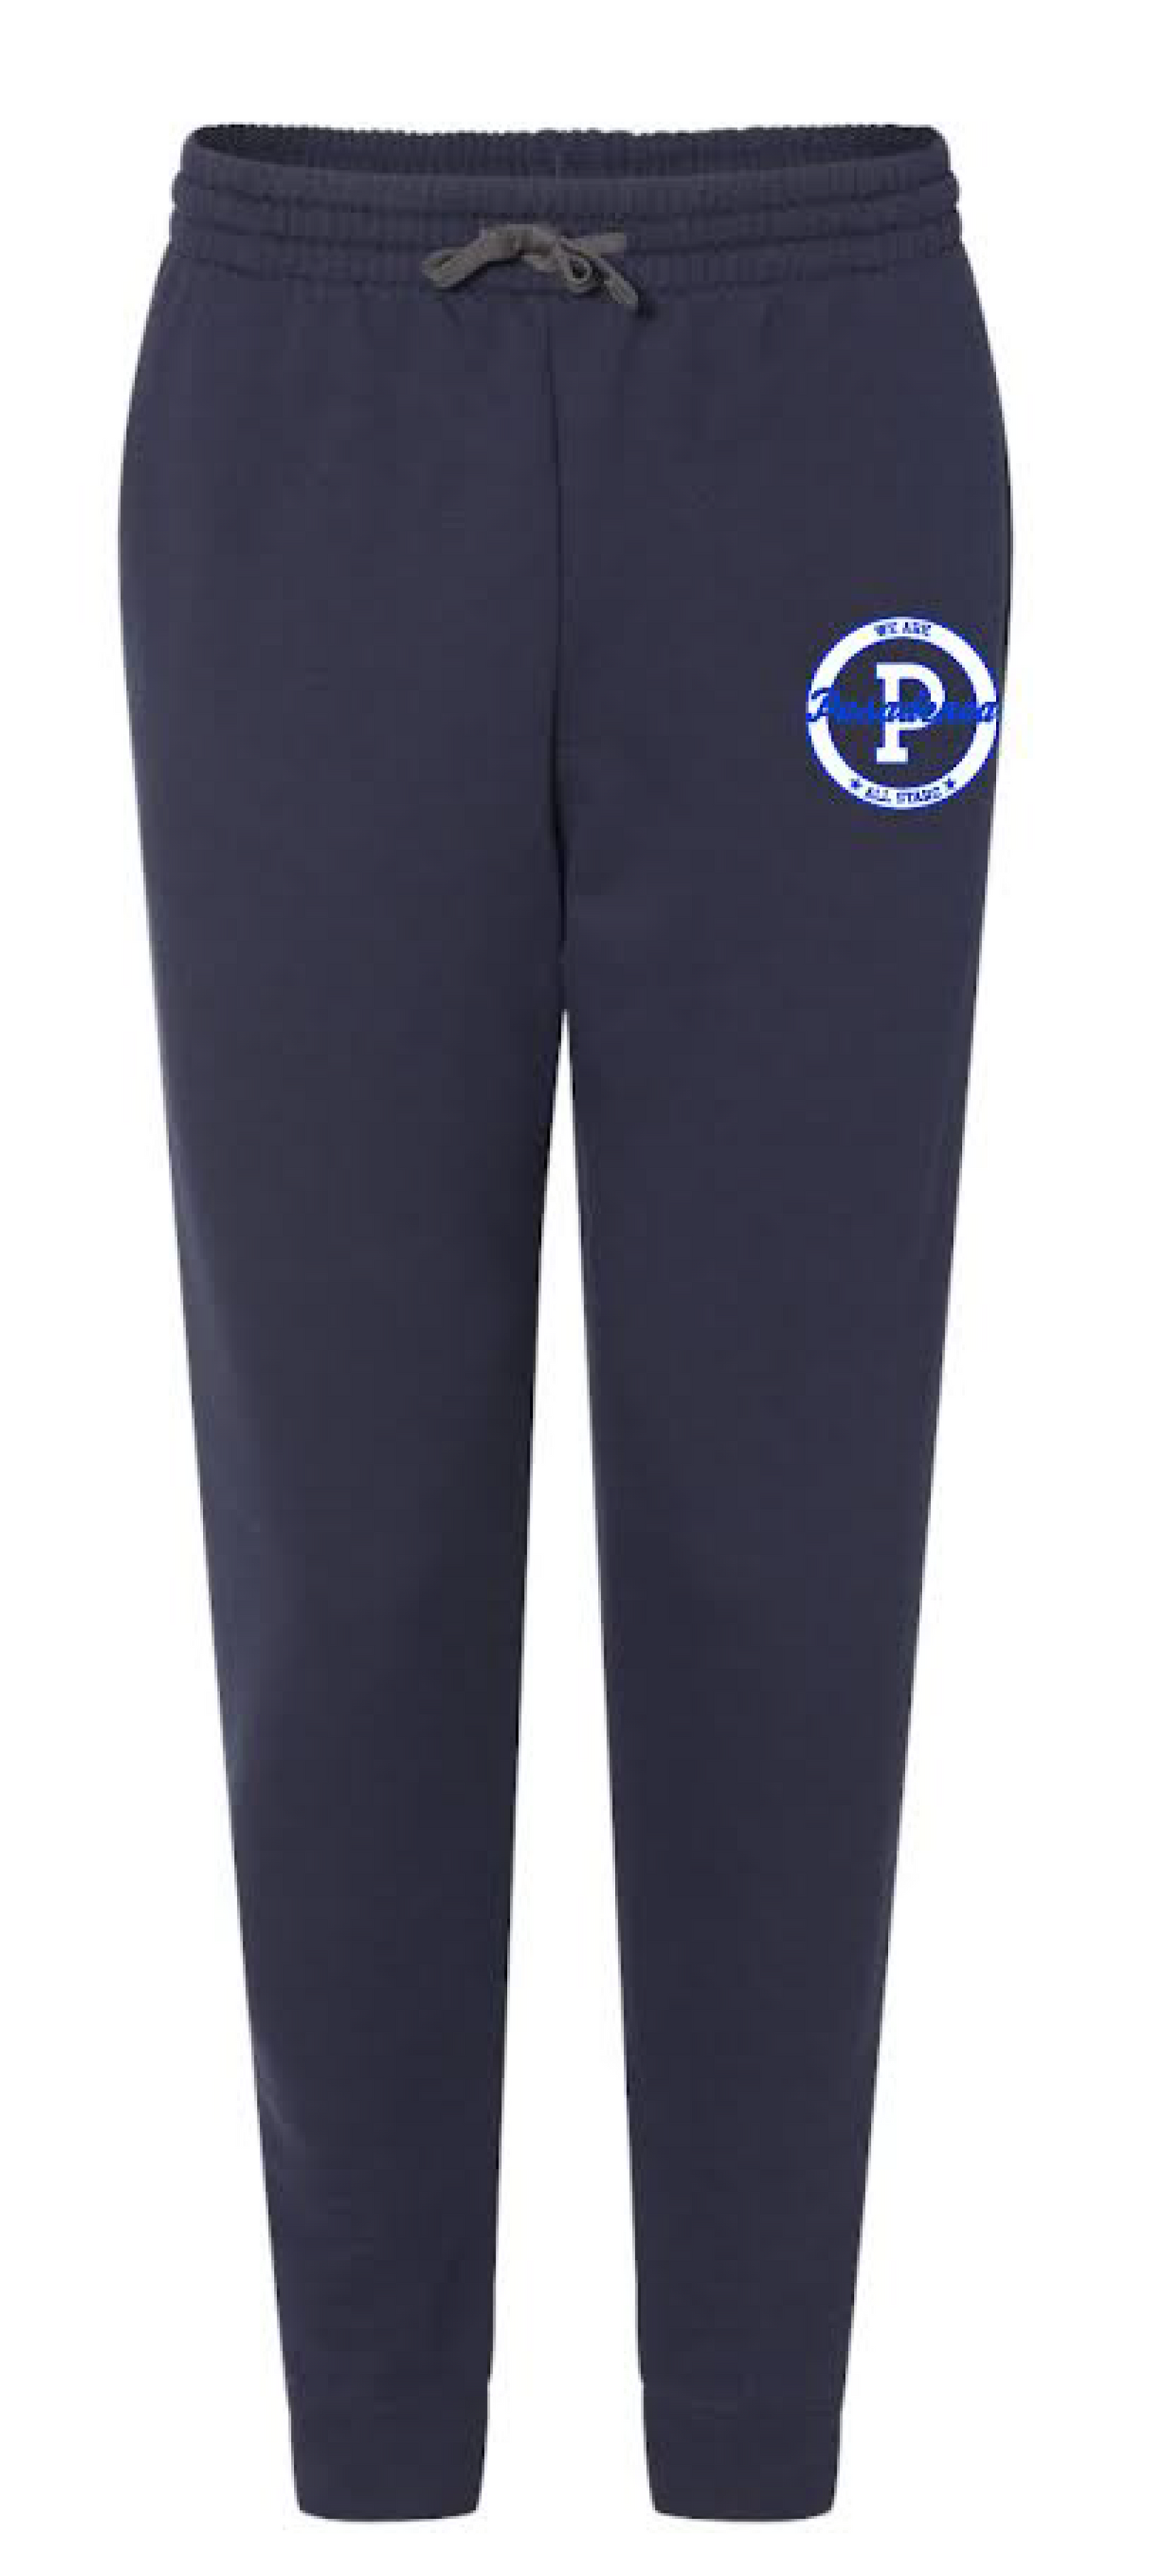 Pasadena Elementary We Are All-Stars Adult Sweatpants 975MPR